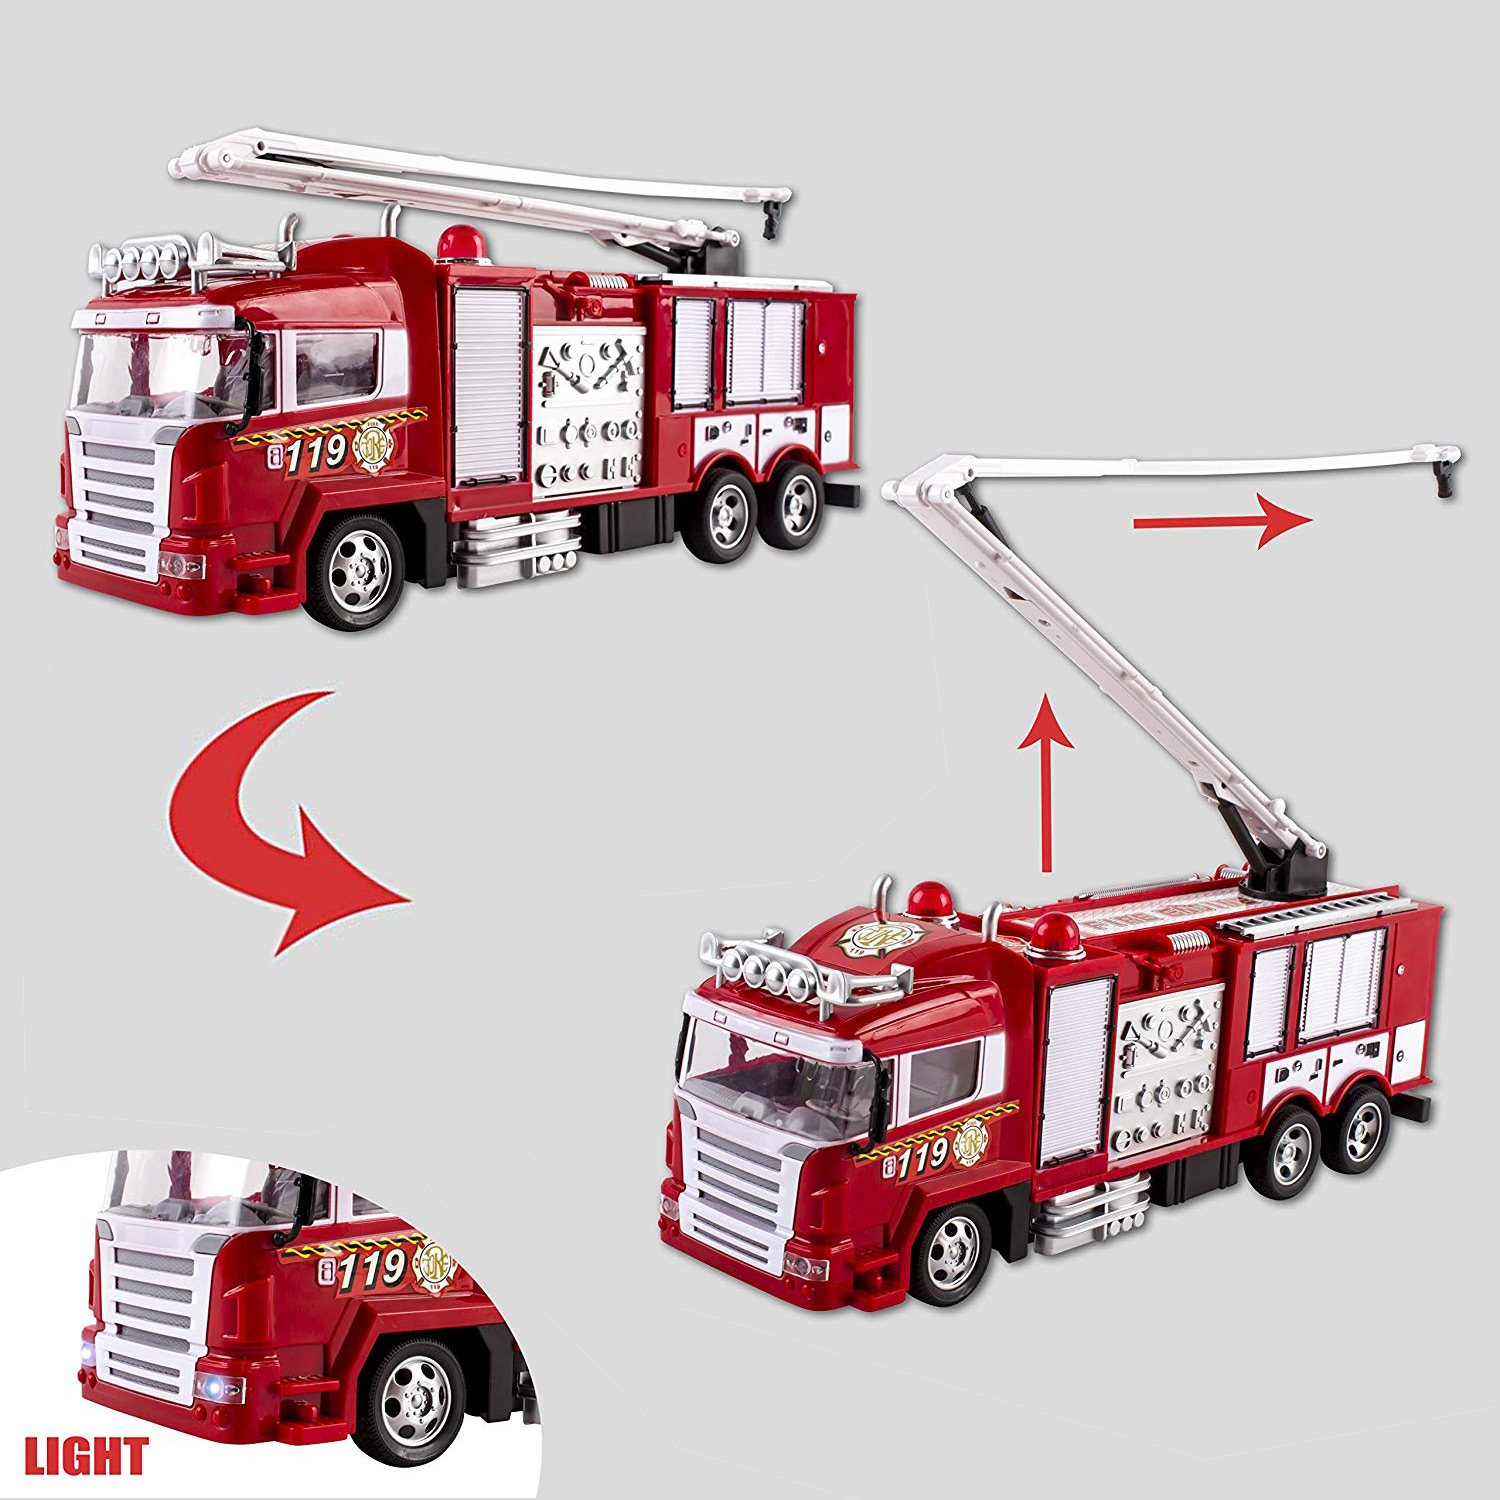 LARGE FIRE RESCUE FIRE ENGINE TRUCK Extendable ladder Remote Control Car  30CM 